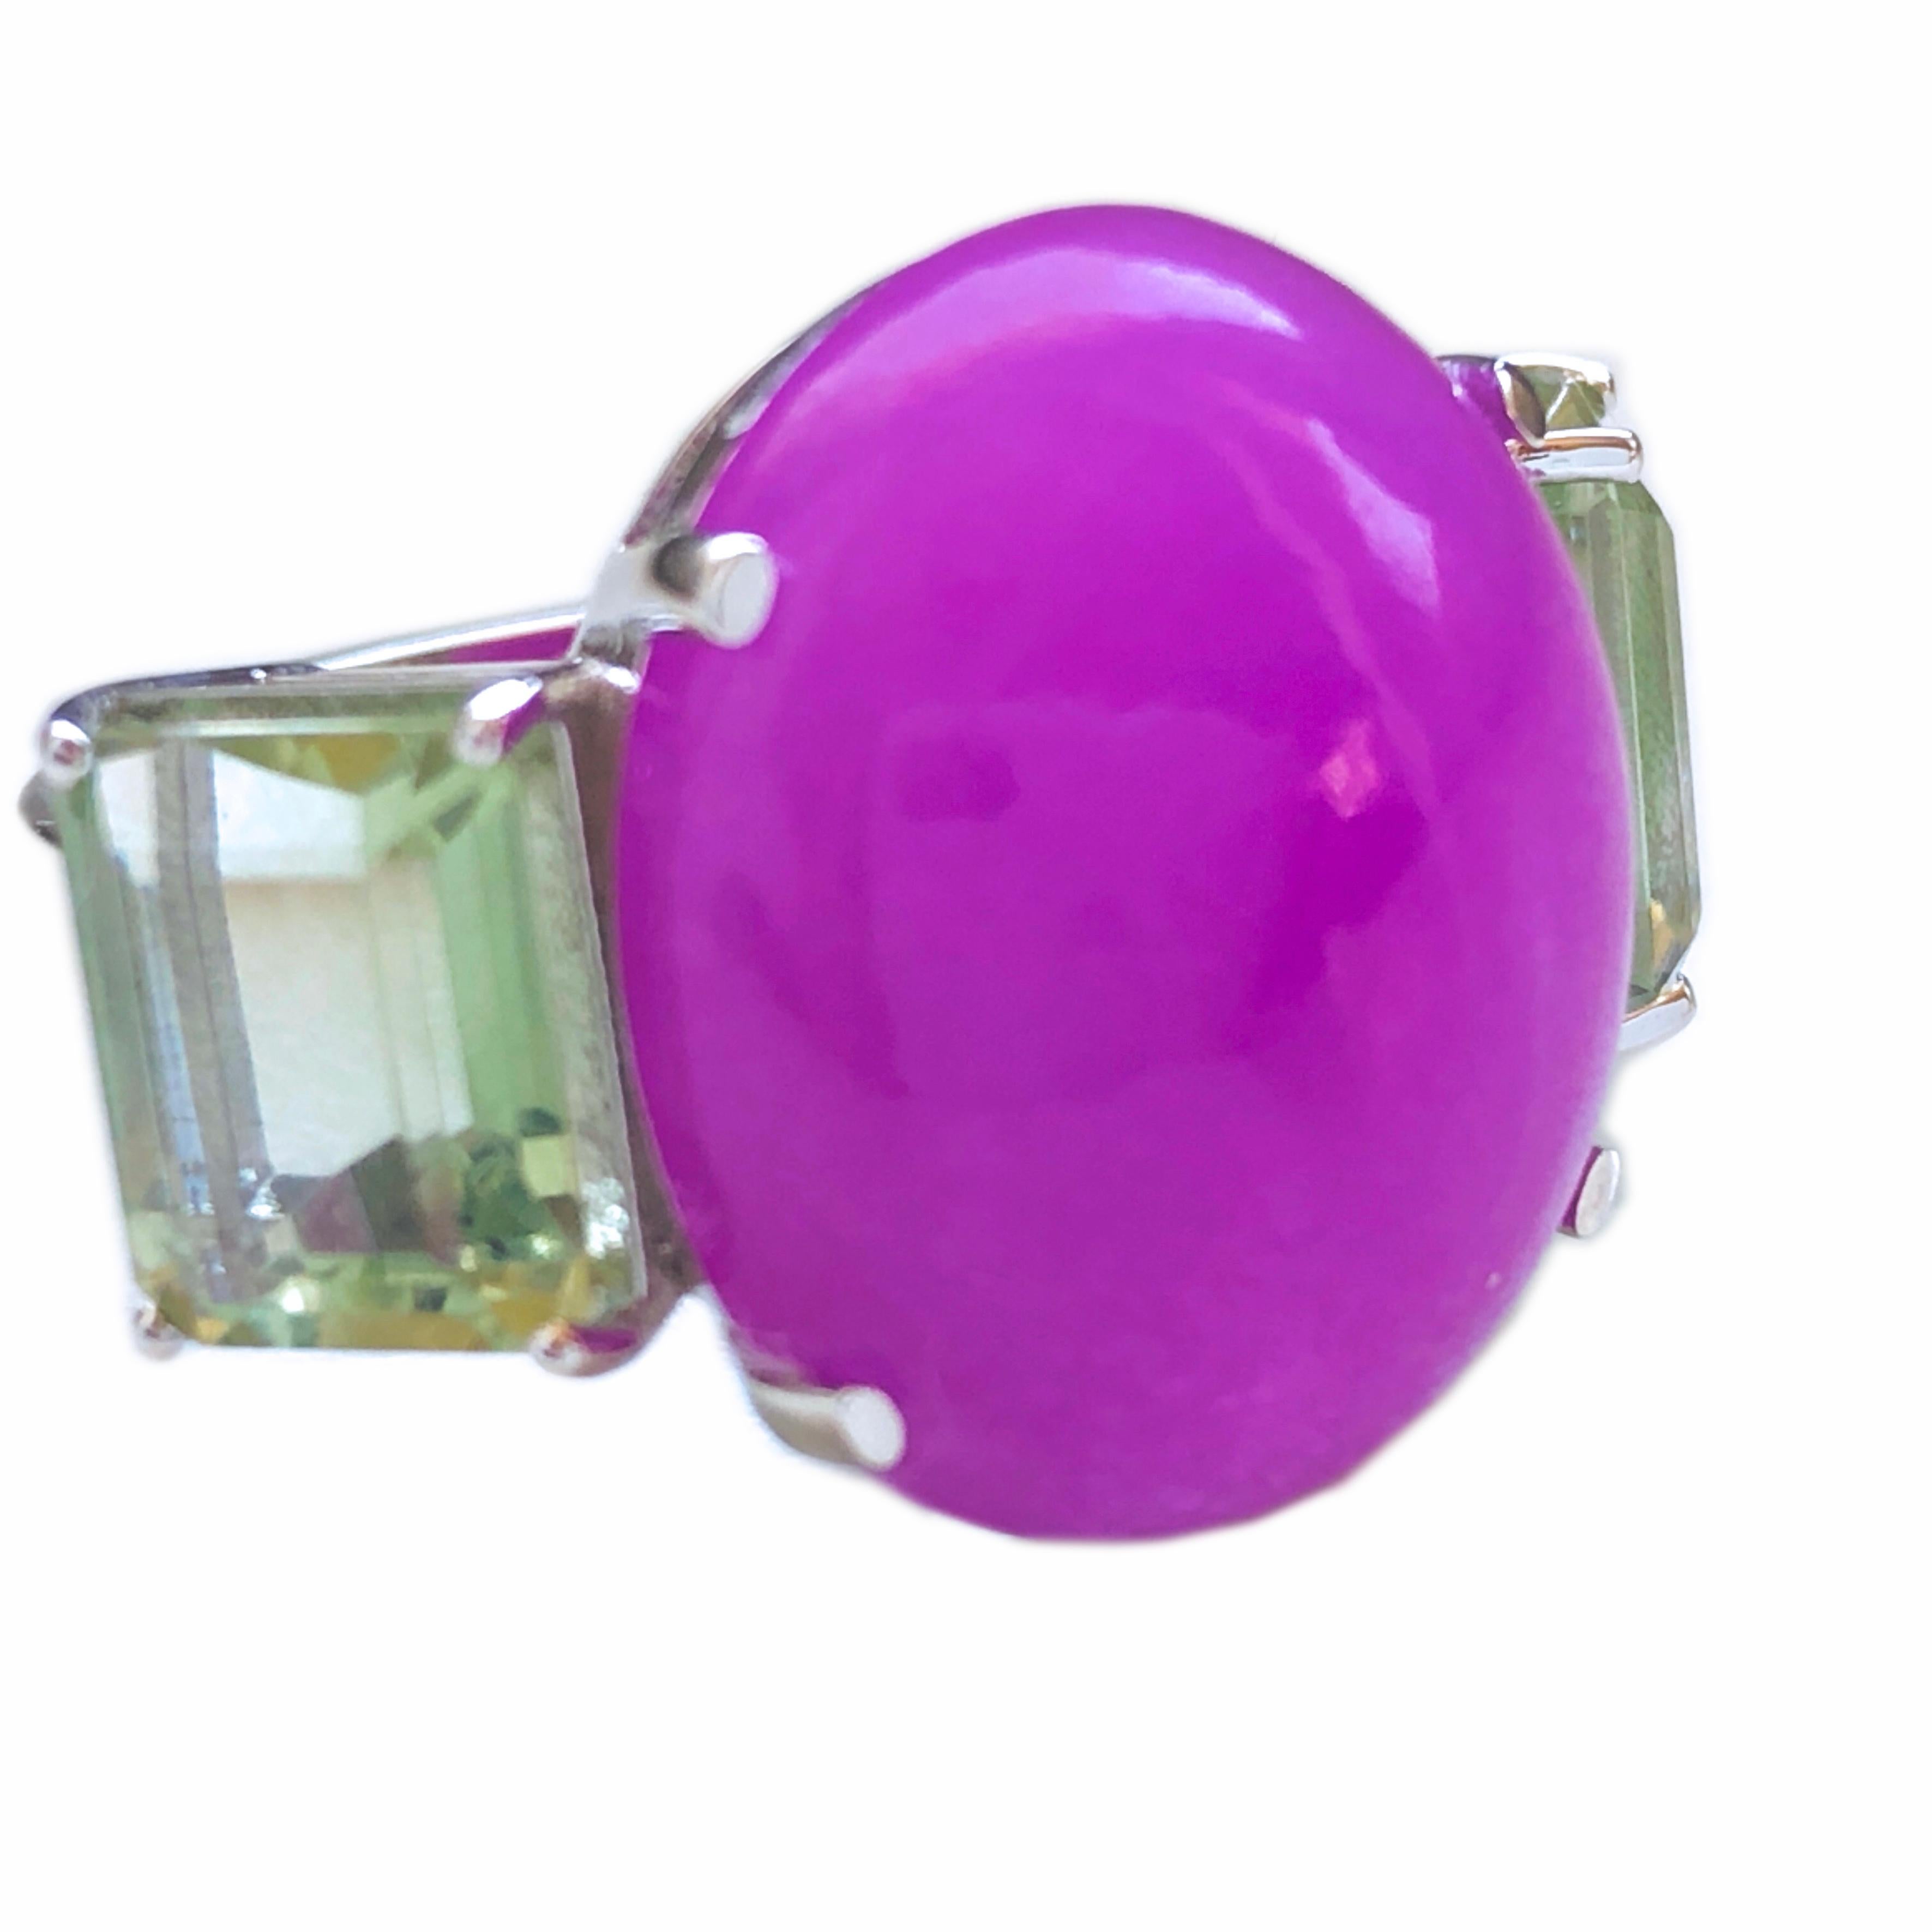 One-of-a-kind Chic and Glamorous Contemporary Cocktail Ring featuring an 11.70 Carat Natural Oval Cabochon Lavender Jade surrounded by two 3.79 Carat Light Green Sage Prasiolite(green amethyst) Emerald Cut. 
In our fitted Burgundy Leather Case.
A